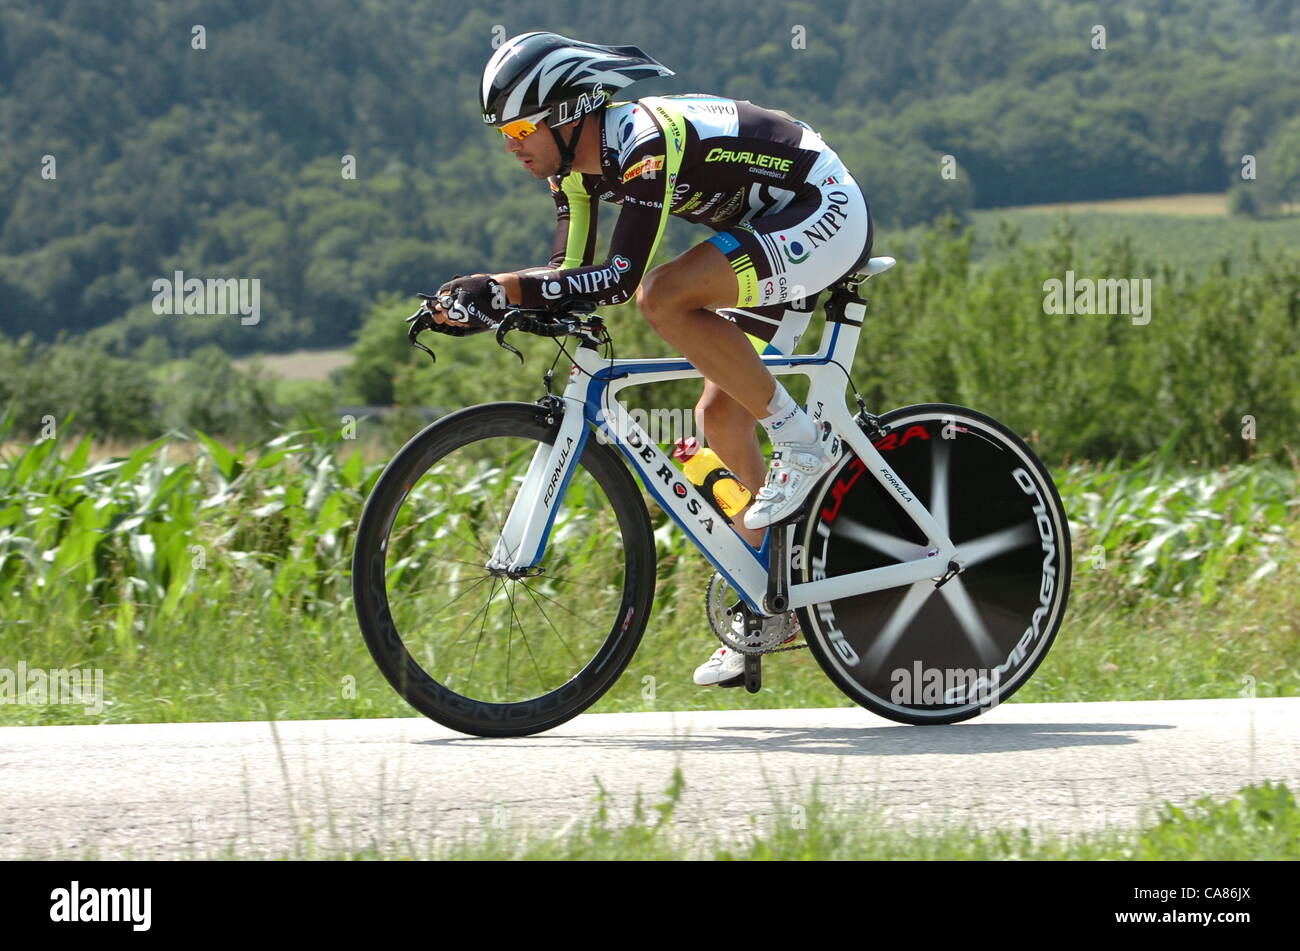 25.06.2012. Italy. Campionato Italiano cronometro, Team Nippo 2012,  Campagnaro Simone Time Trial Day. The Championship of Italy is a race for  many categories,including Elite, Juniors, Female Students , Elite, Under 23  and